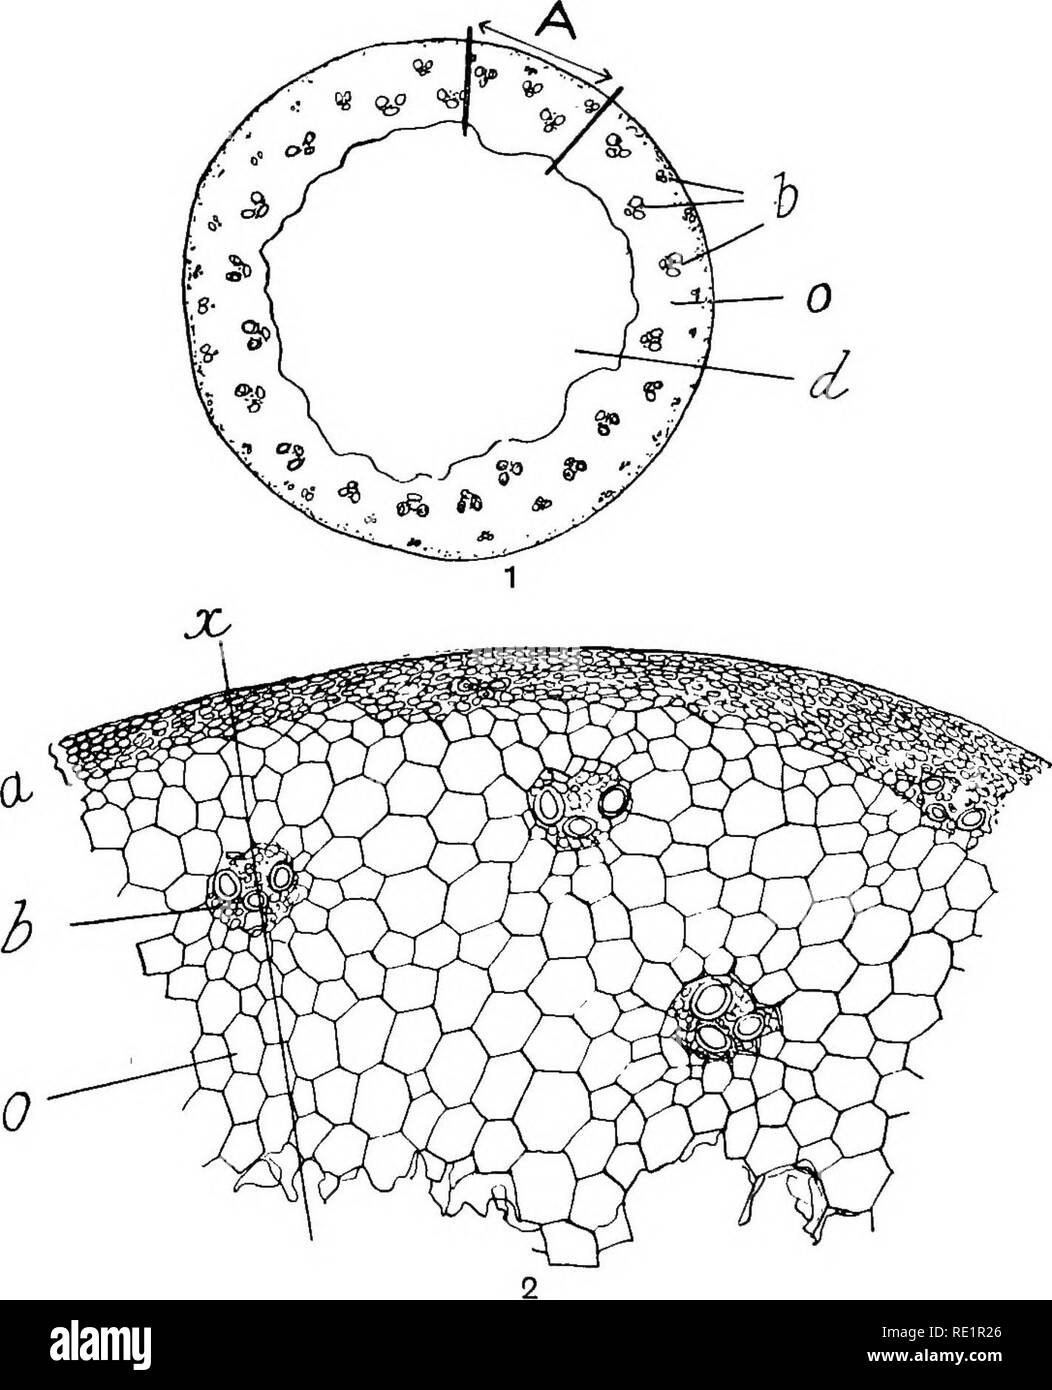 . Agricultural botany, theoretical and practical. Botany, Economic; Botany. 138 ANATOMY OF STEM, ROOT AND LEAF Ex. 67.—Cut sections through the stems of maize, asparagus, or any species of lily : observe with a lens the scattered arrangement of the vascular bundles.. Fig. 70.—I. Transverse section through a barley stem, b Vascular bundles ; o ground- tissue ; rf hollow cavity. (Enlarged 14 diameters.) 2. Enlarged view of portion A. a Thick-walled ground-tissue cells and epidermis; 0 thin-walled ground-tissue cells ; /; vascular bundle. (Enlarged about go diameters.). Please note that these ima Stock Photo